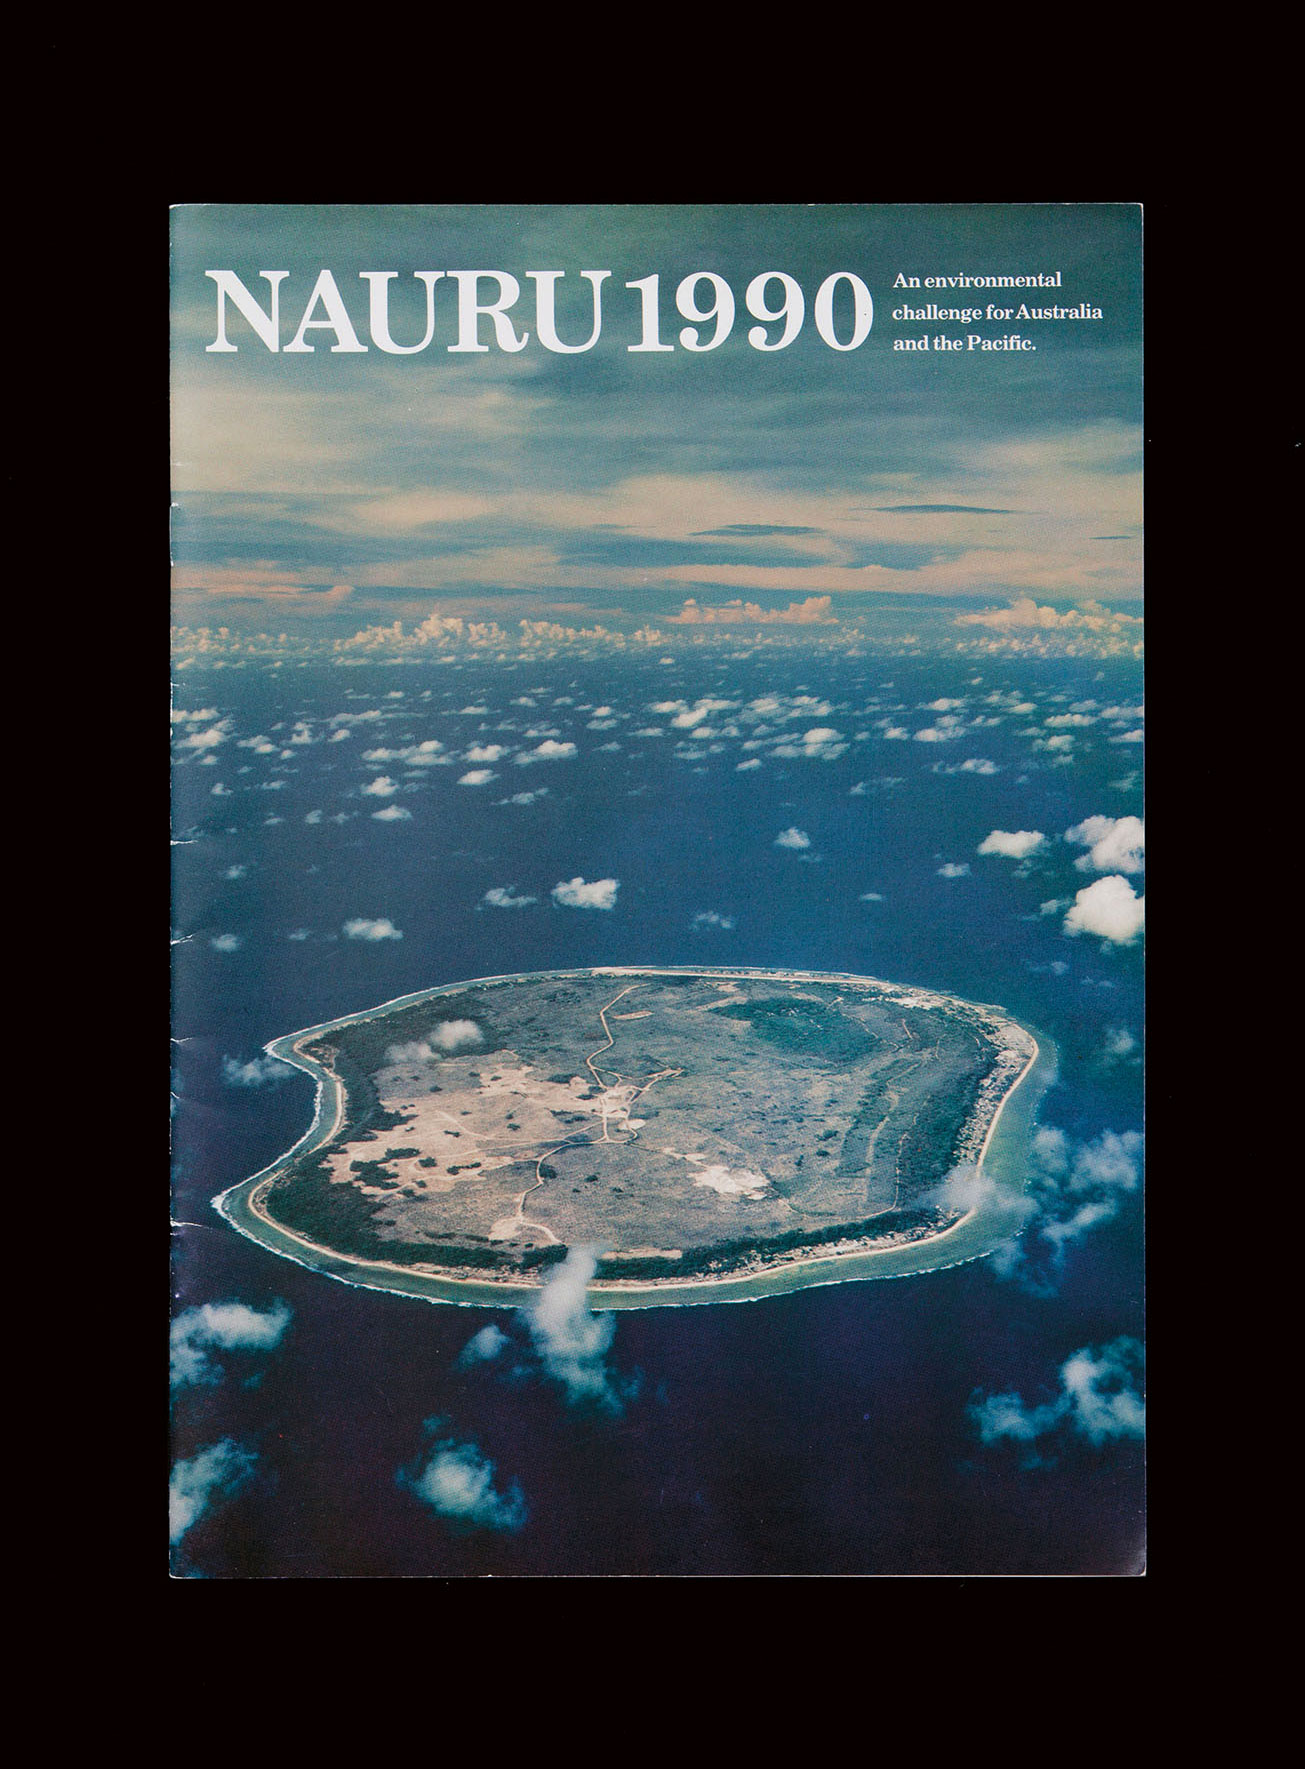 Front cover of *Nauru 1990: An Environmental Challenge for Australia and the Pacific*, produced for the Government of the Republic of Nauru by Helen Bogdan and Associates in Melbourne, 1990. Reproduction photographer: Andrew Curtis.